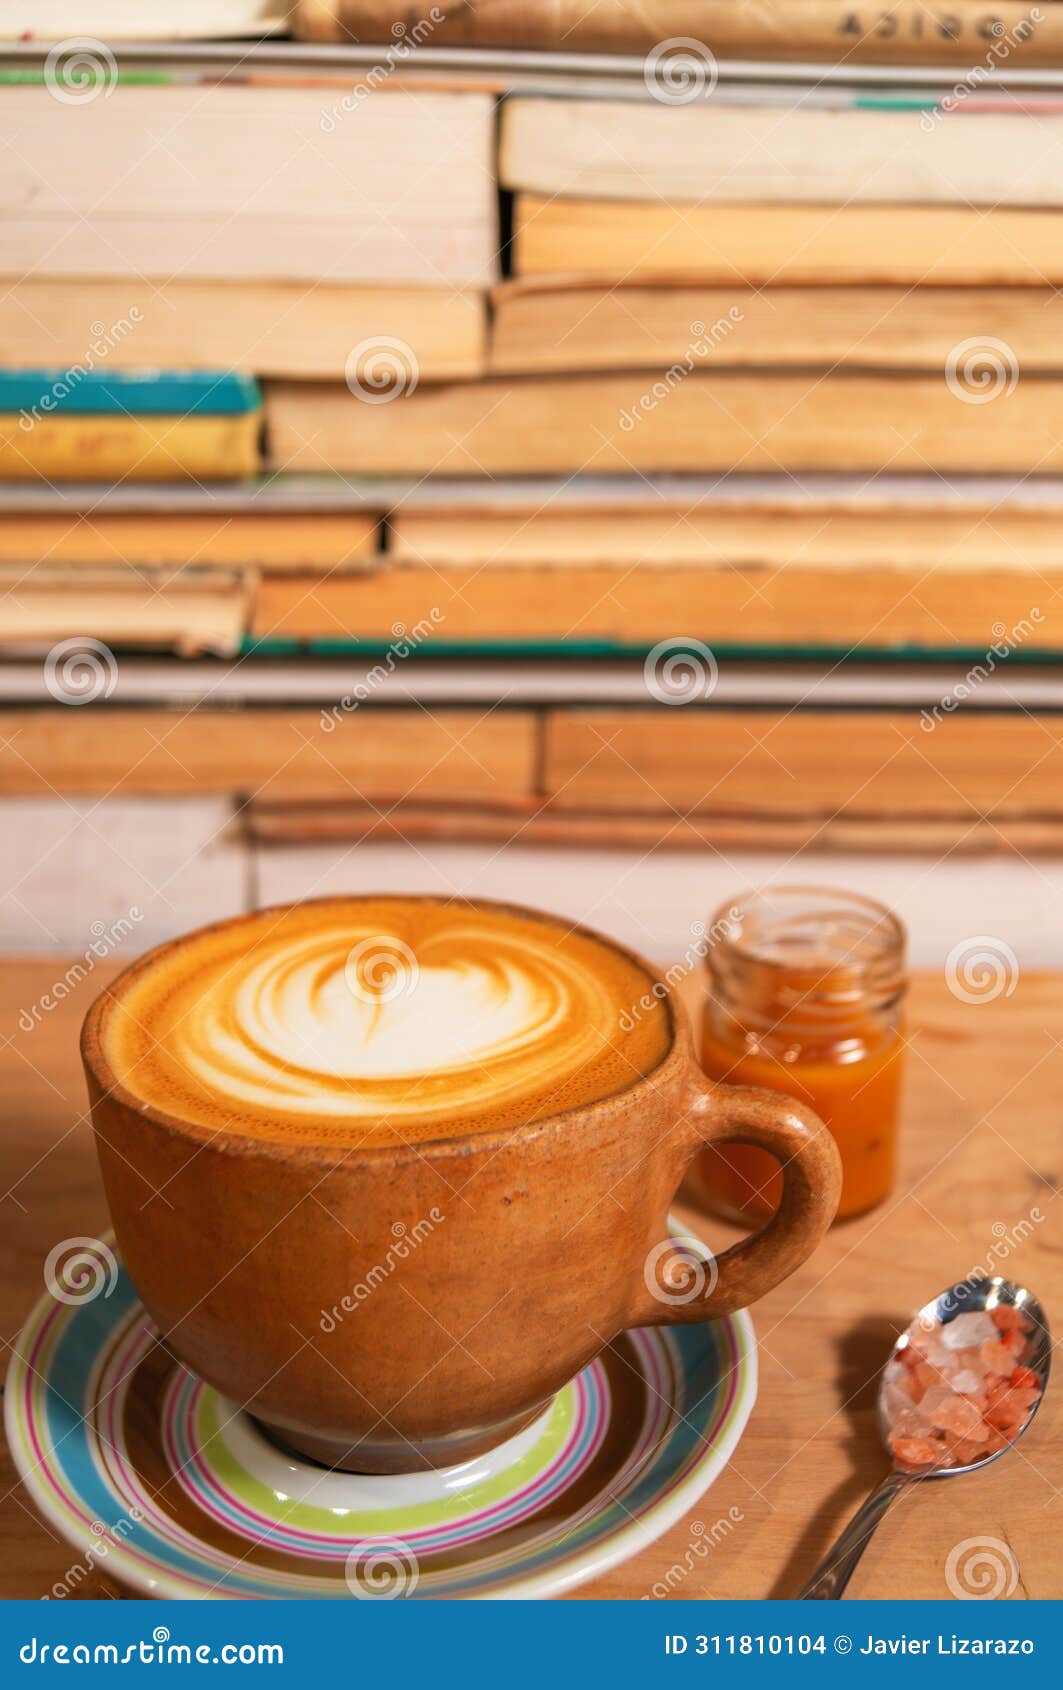 rustic ochre cappuccino mug with caramel and himalayan salt, d foam on plate, wood and book background - taza de capuchino r